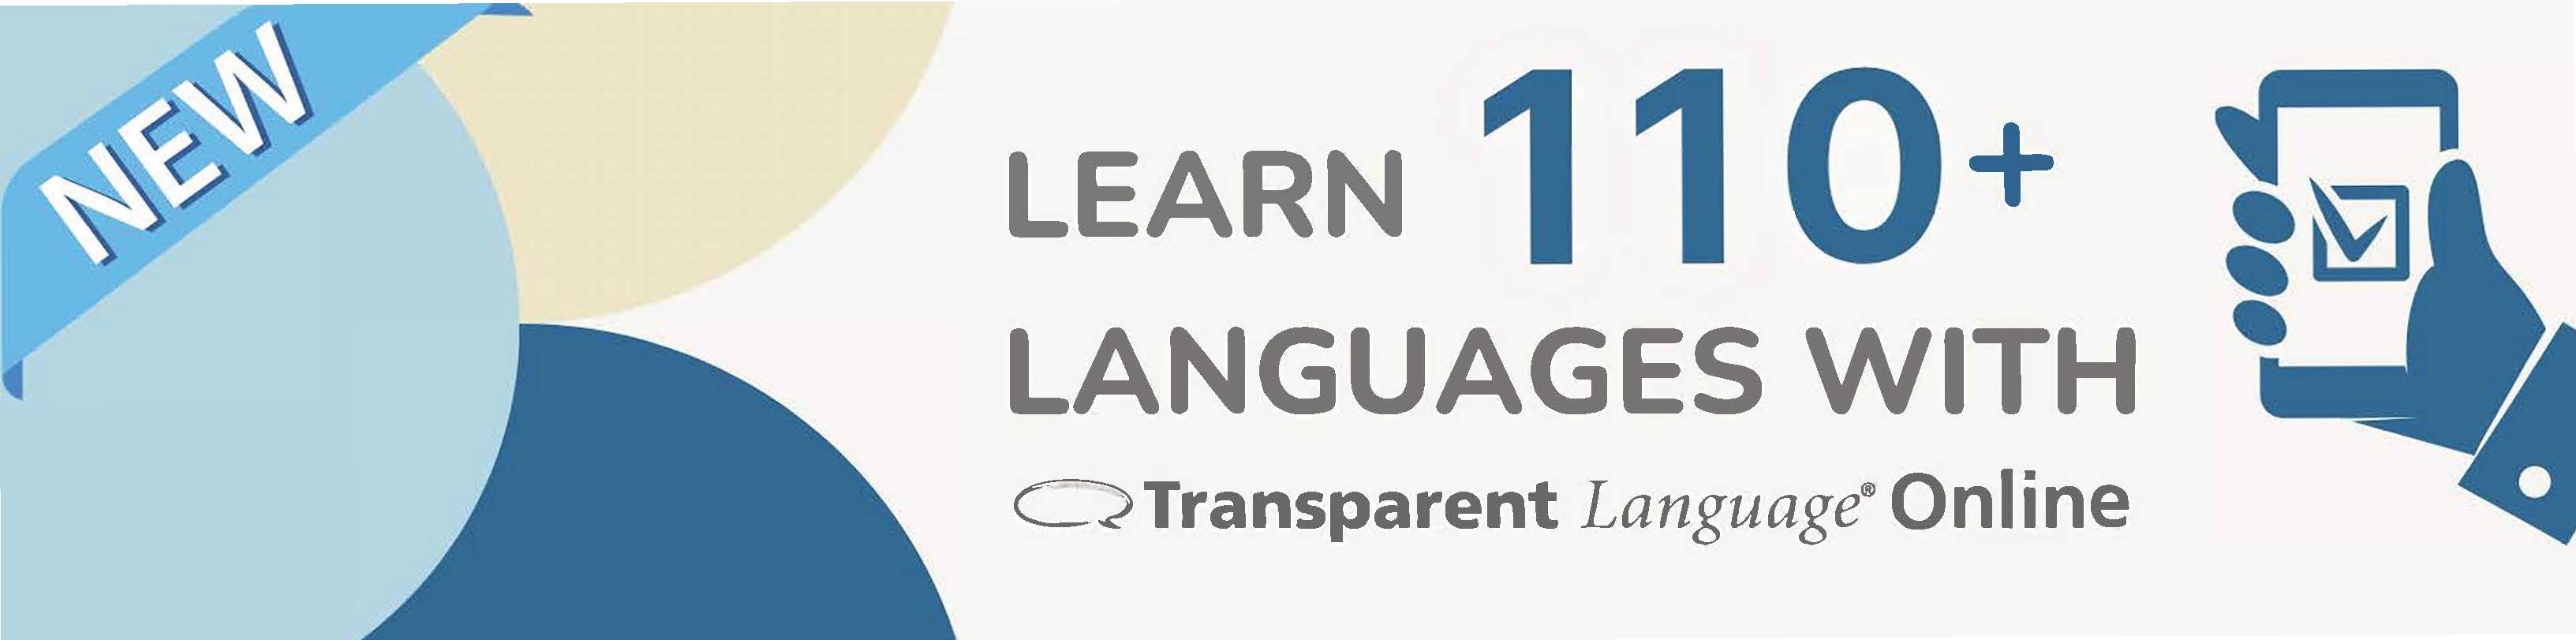 Learn 110 languages with Transparent Language Online